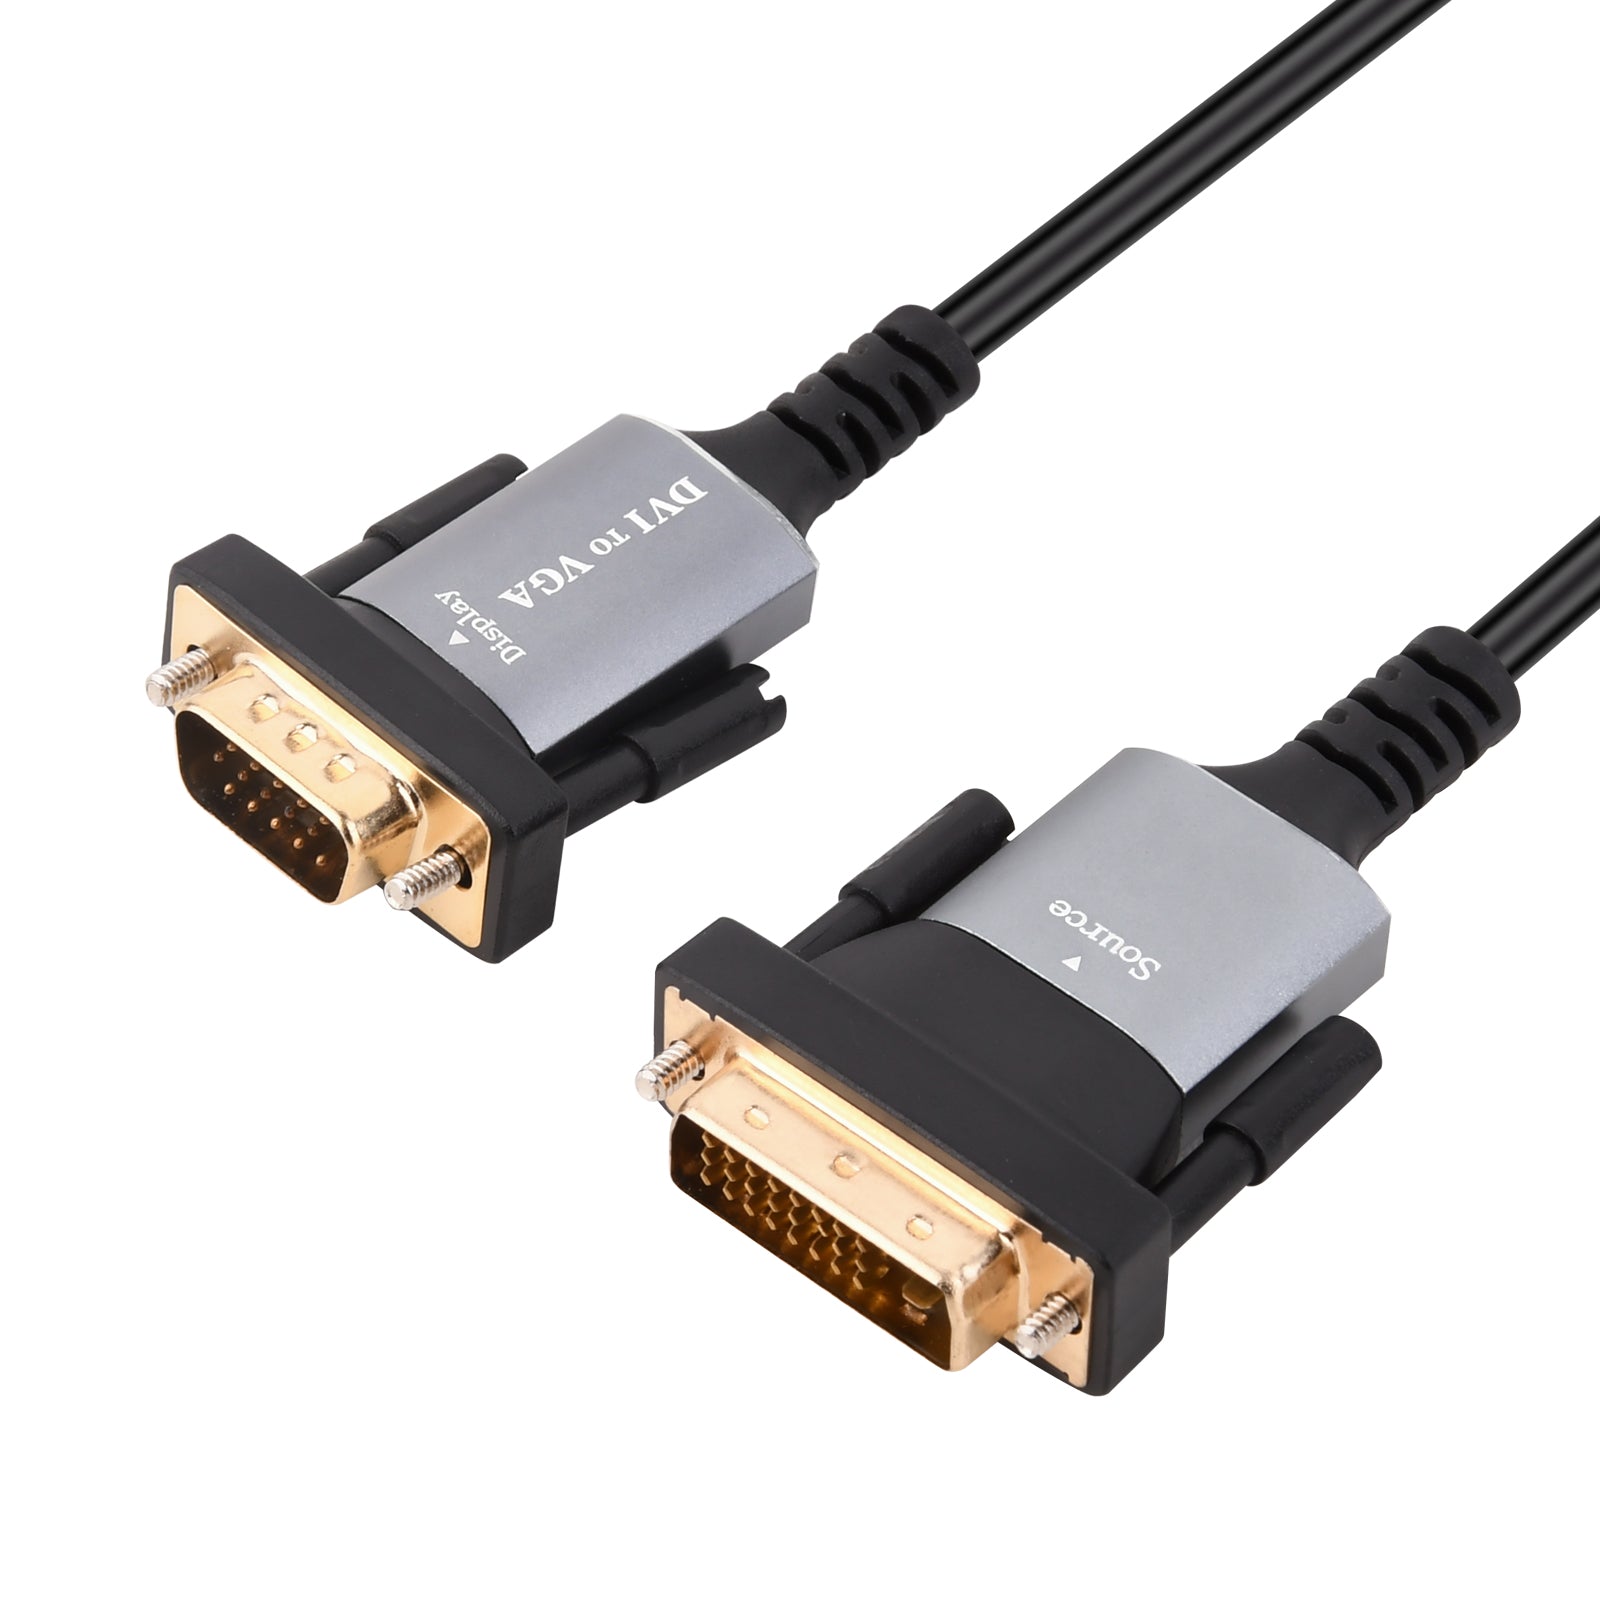 DVI-I (24+5 pin) Male to VGA 15 Pin Male Video Cable 1.8m